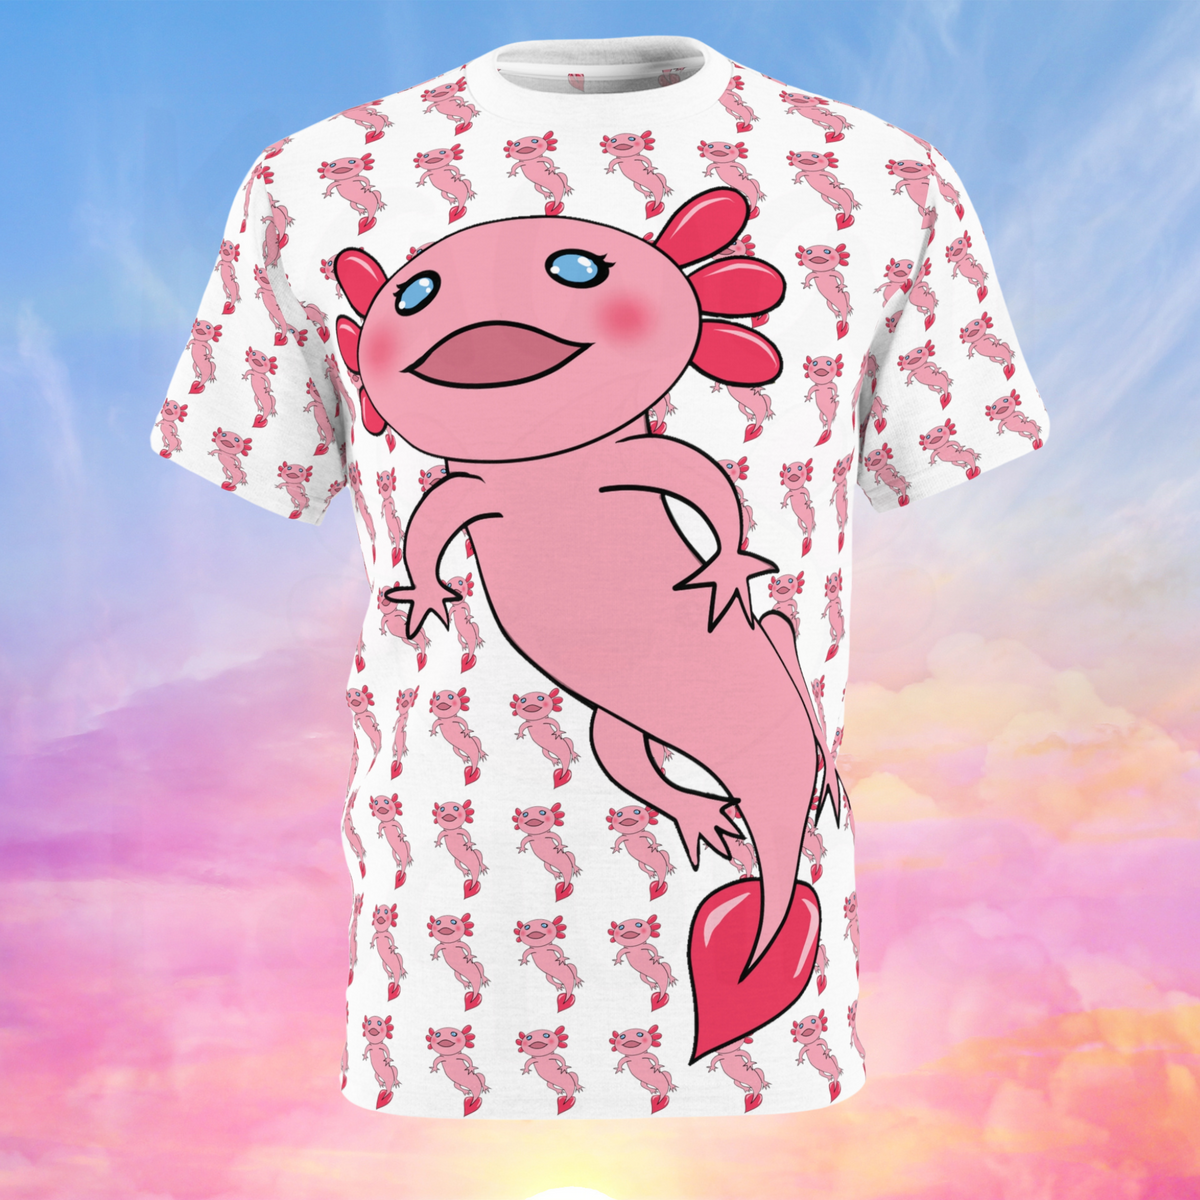 T-shirt featuring a cute pink axolotl design. The background of the shirt is white with a repeating pattern of smaller pink axolotls scattered throughout. A large, centrally positioned pink axolotl with blue eyes and red frills is the main focal point of the design. 